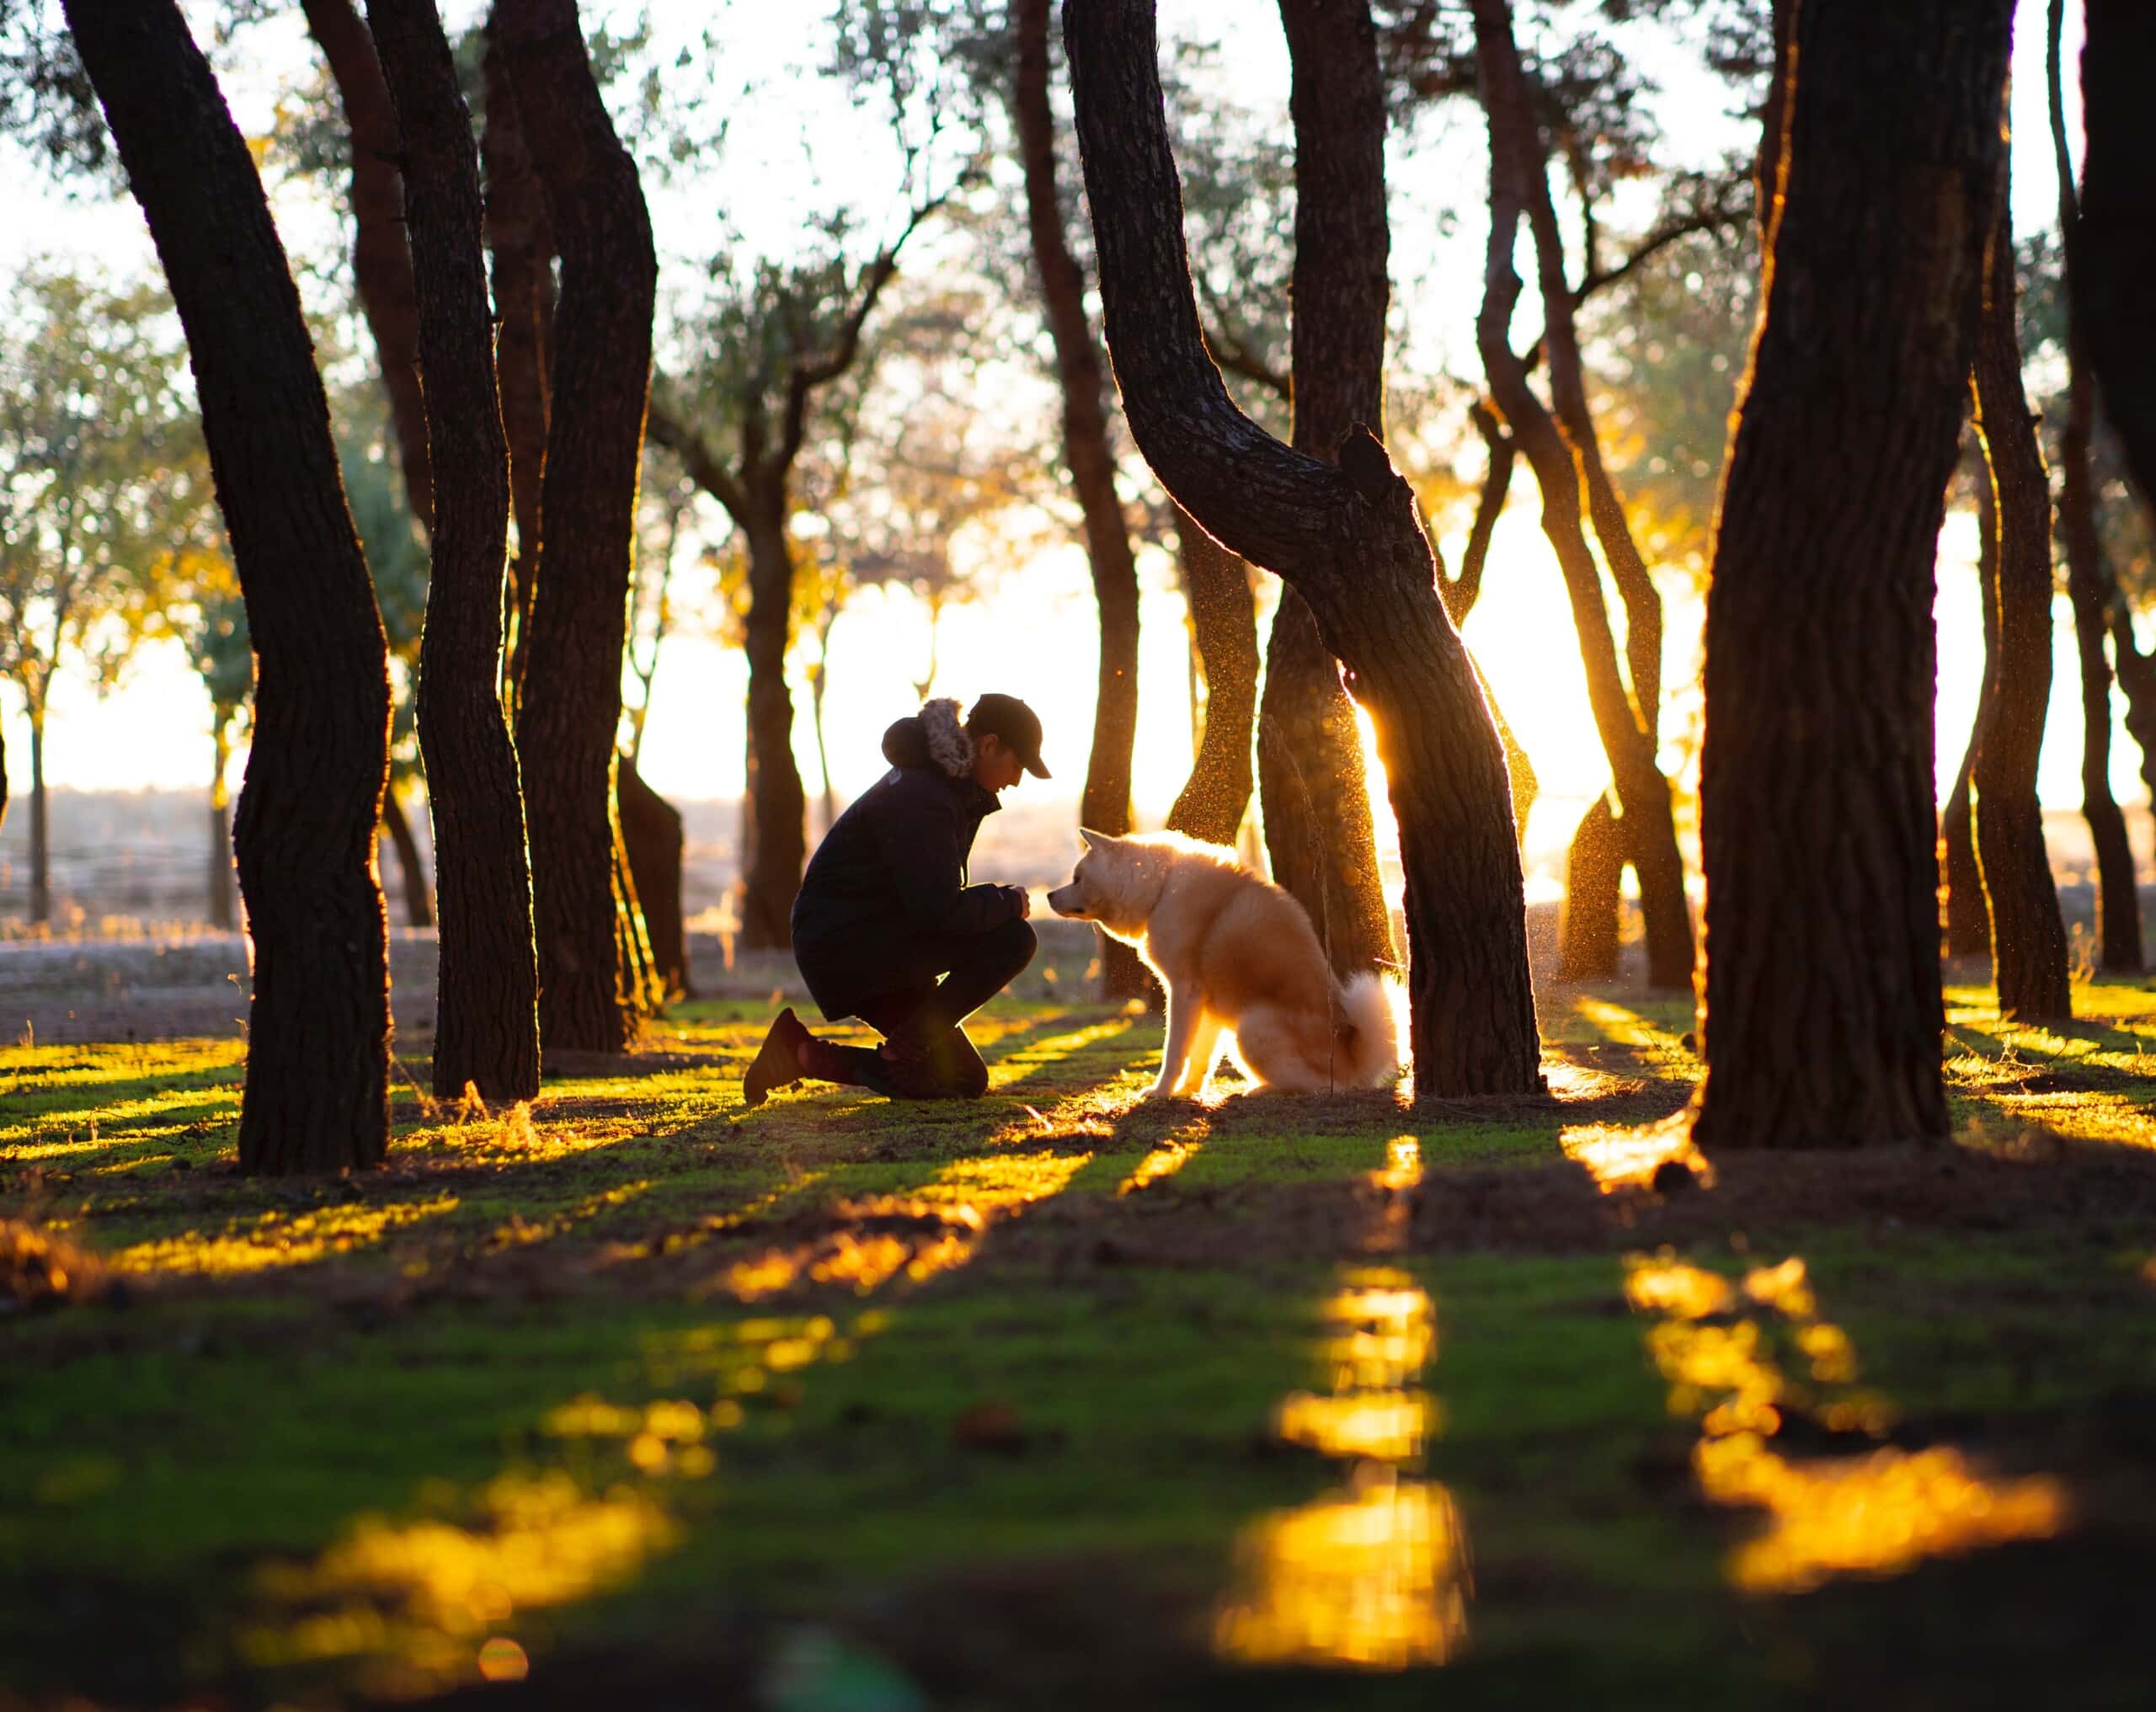 A man kneeling down next to a dog in the woods, seeking solace and company.